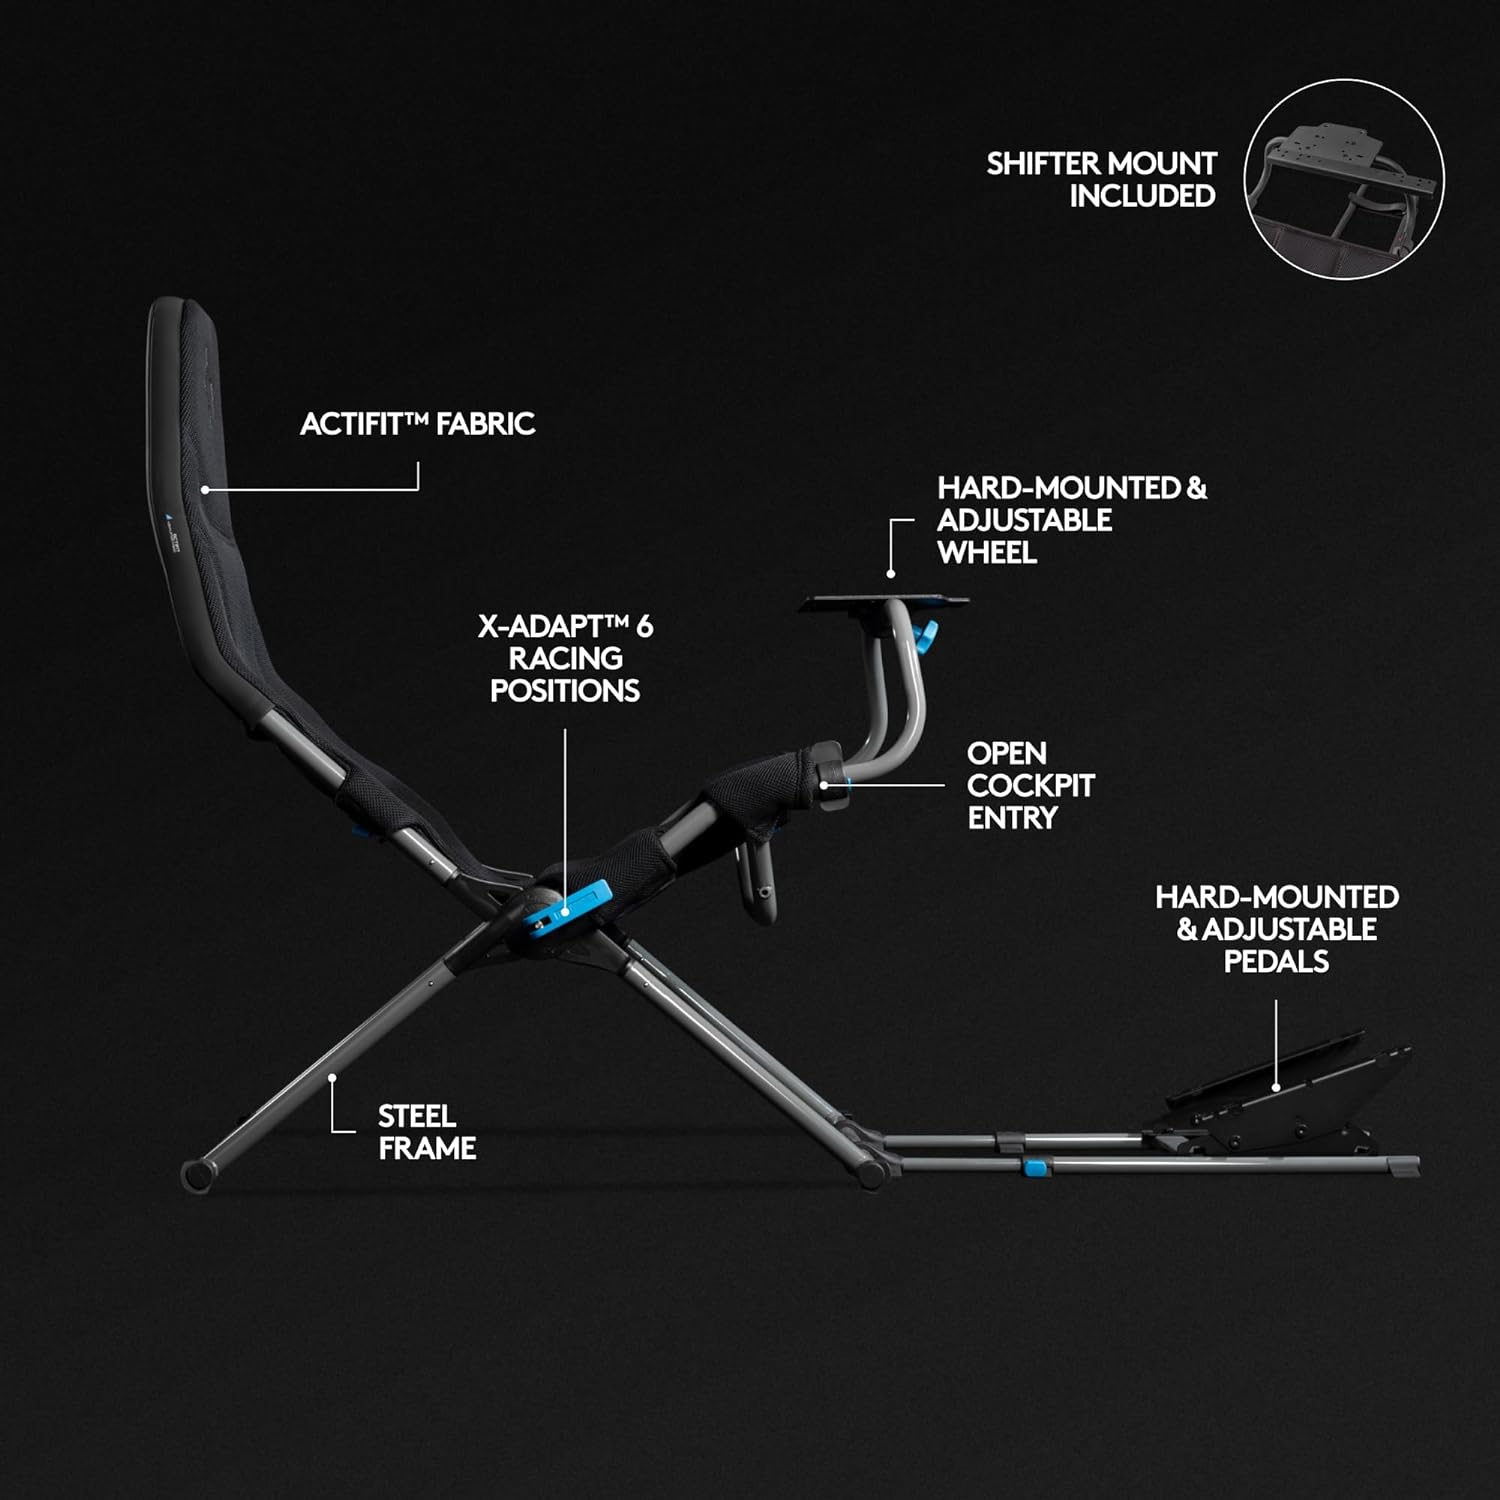 Key features of the Playseat Challenge X - Logitech G Edition sim racing seat